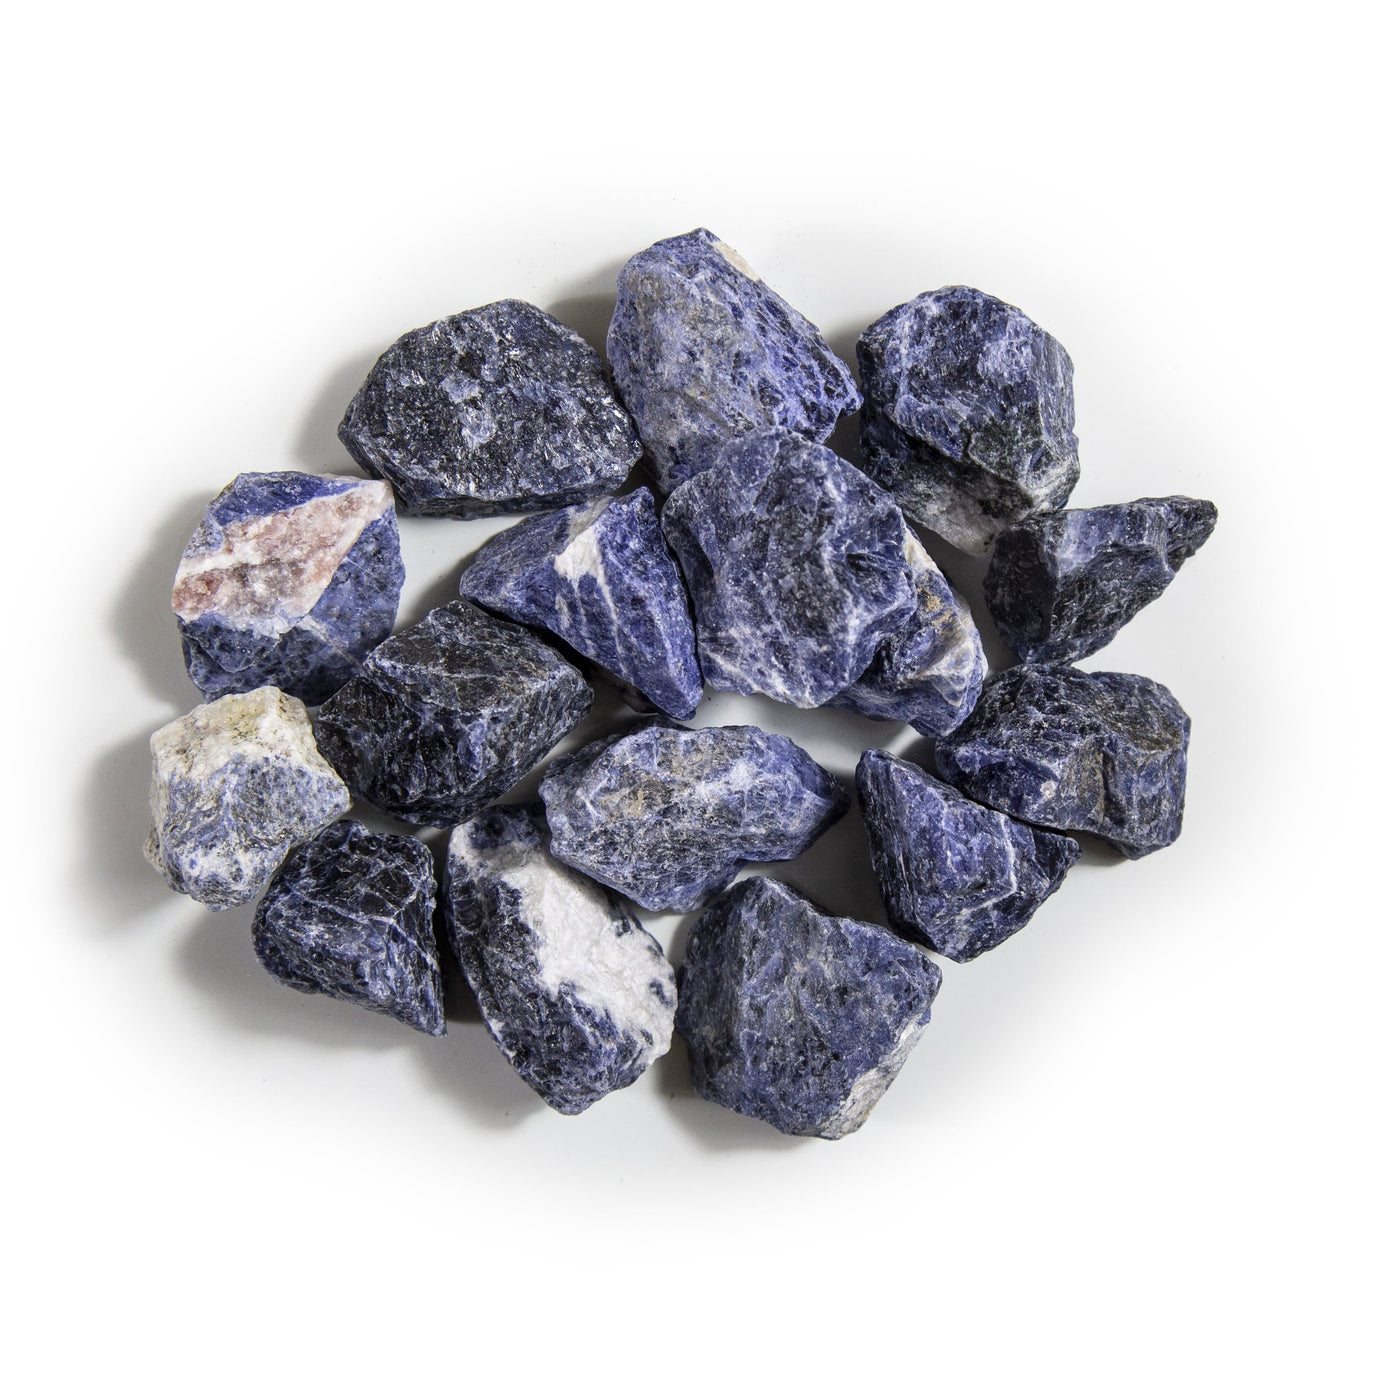 overhead view of many sodalite rough stones in a pile on white background